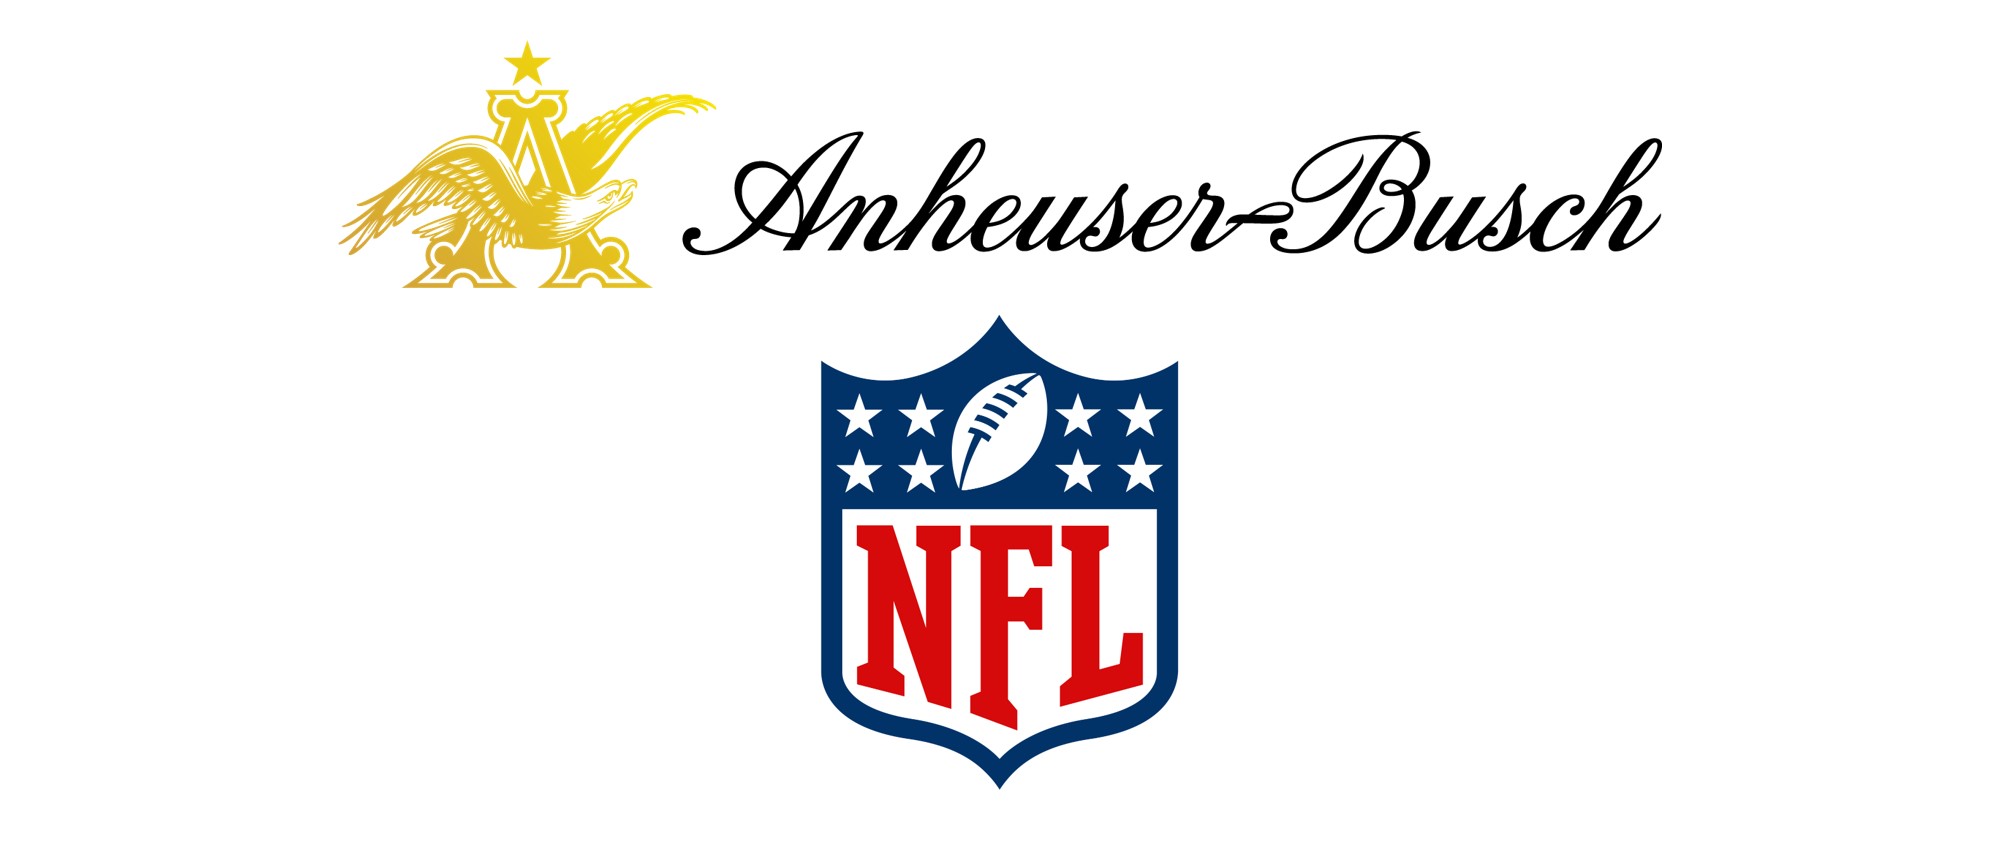 starting-with-the-nfl-draft-anheuser-busch-s-new-multi-year-deal-with-the-nfl-brings-fans